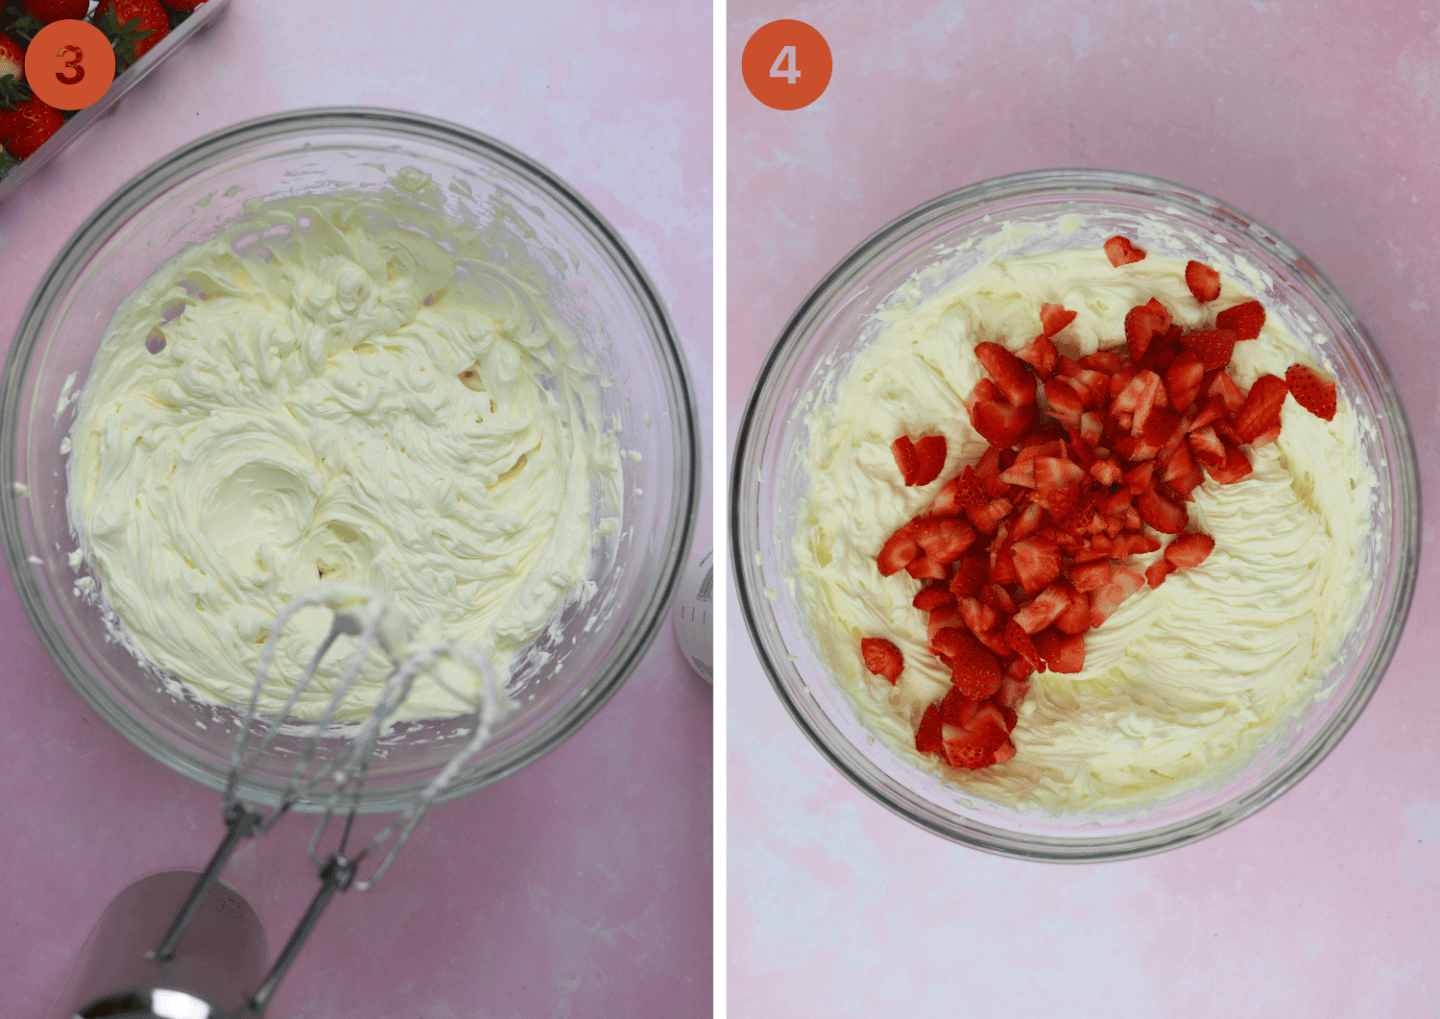 strawberry cheesecake filling step-by-step photos.